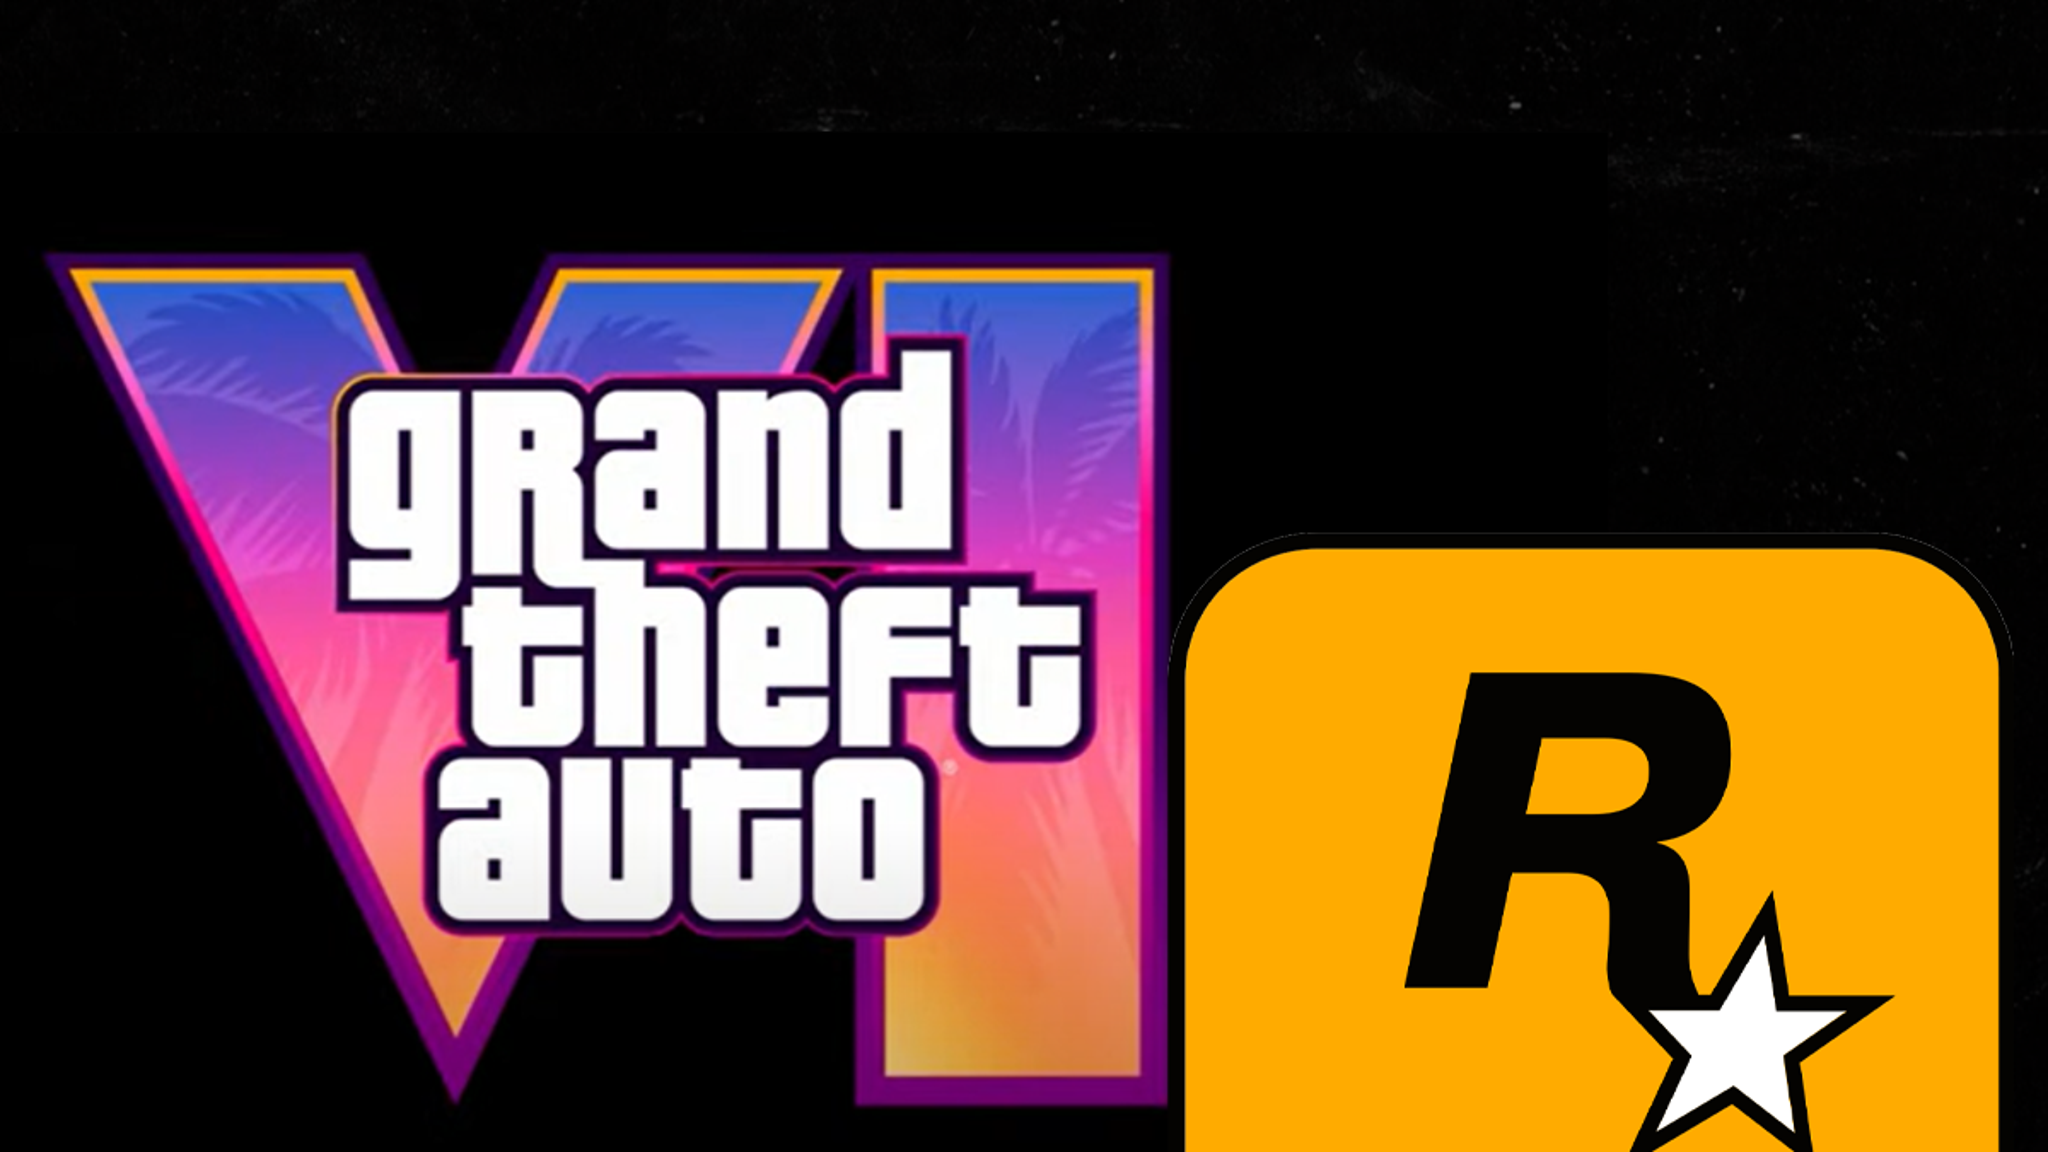 Photo of ‘Grand Theft Auto VI’ Trailer Leaks Day Early, Rockstar Yanks Footage